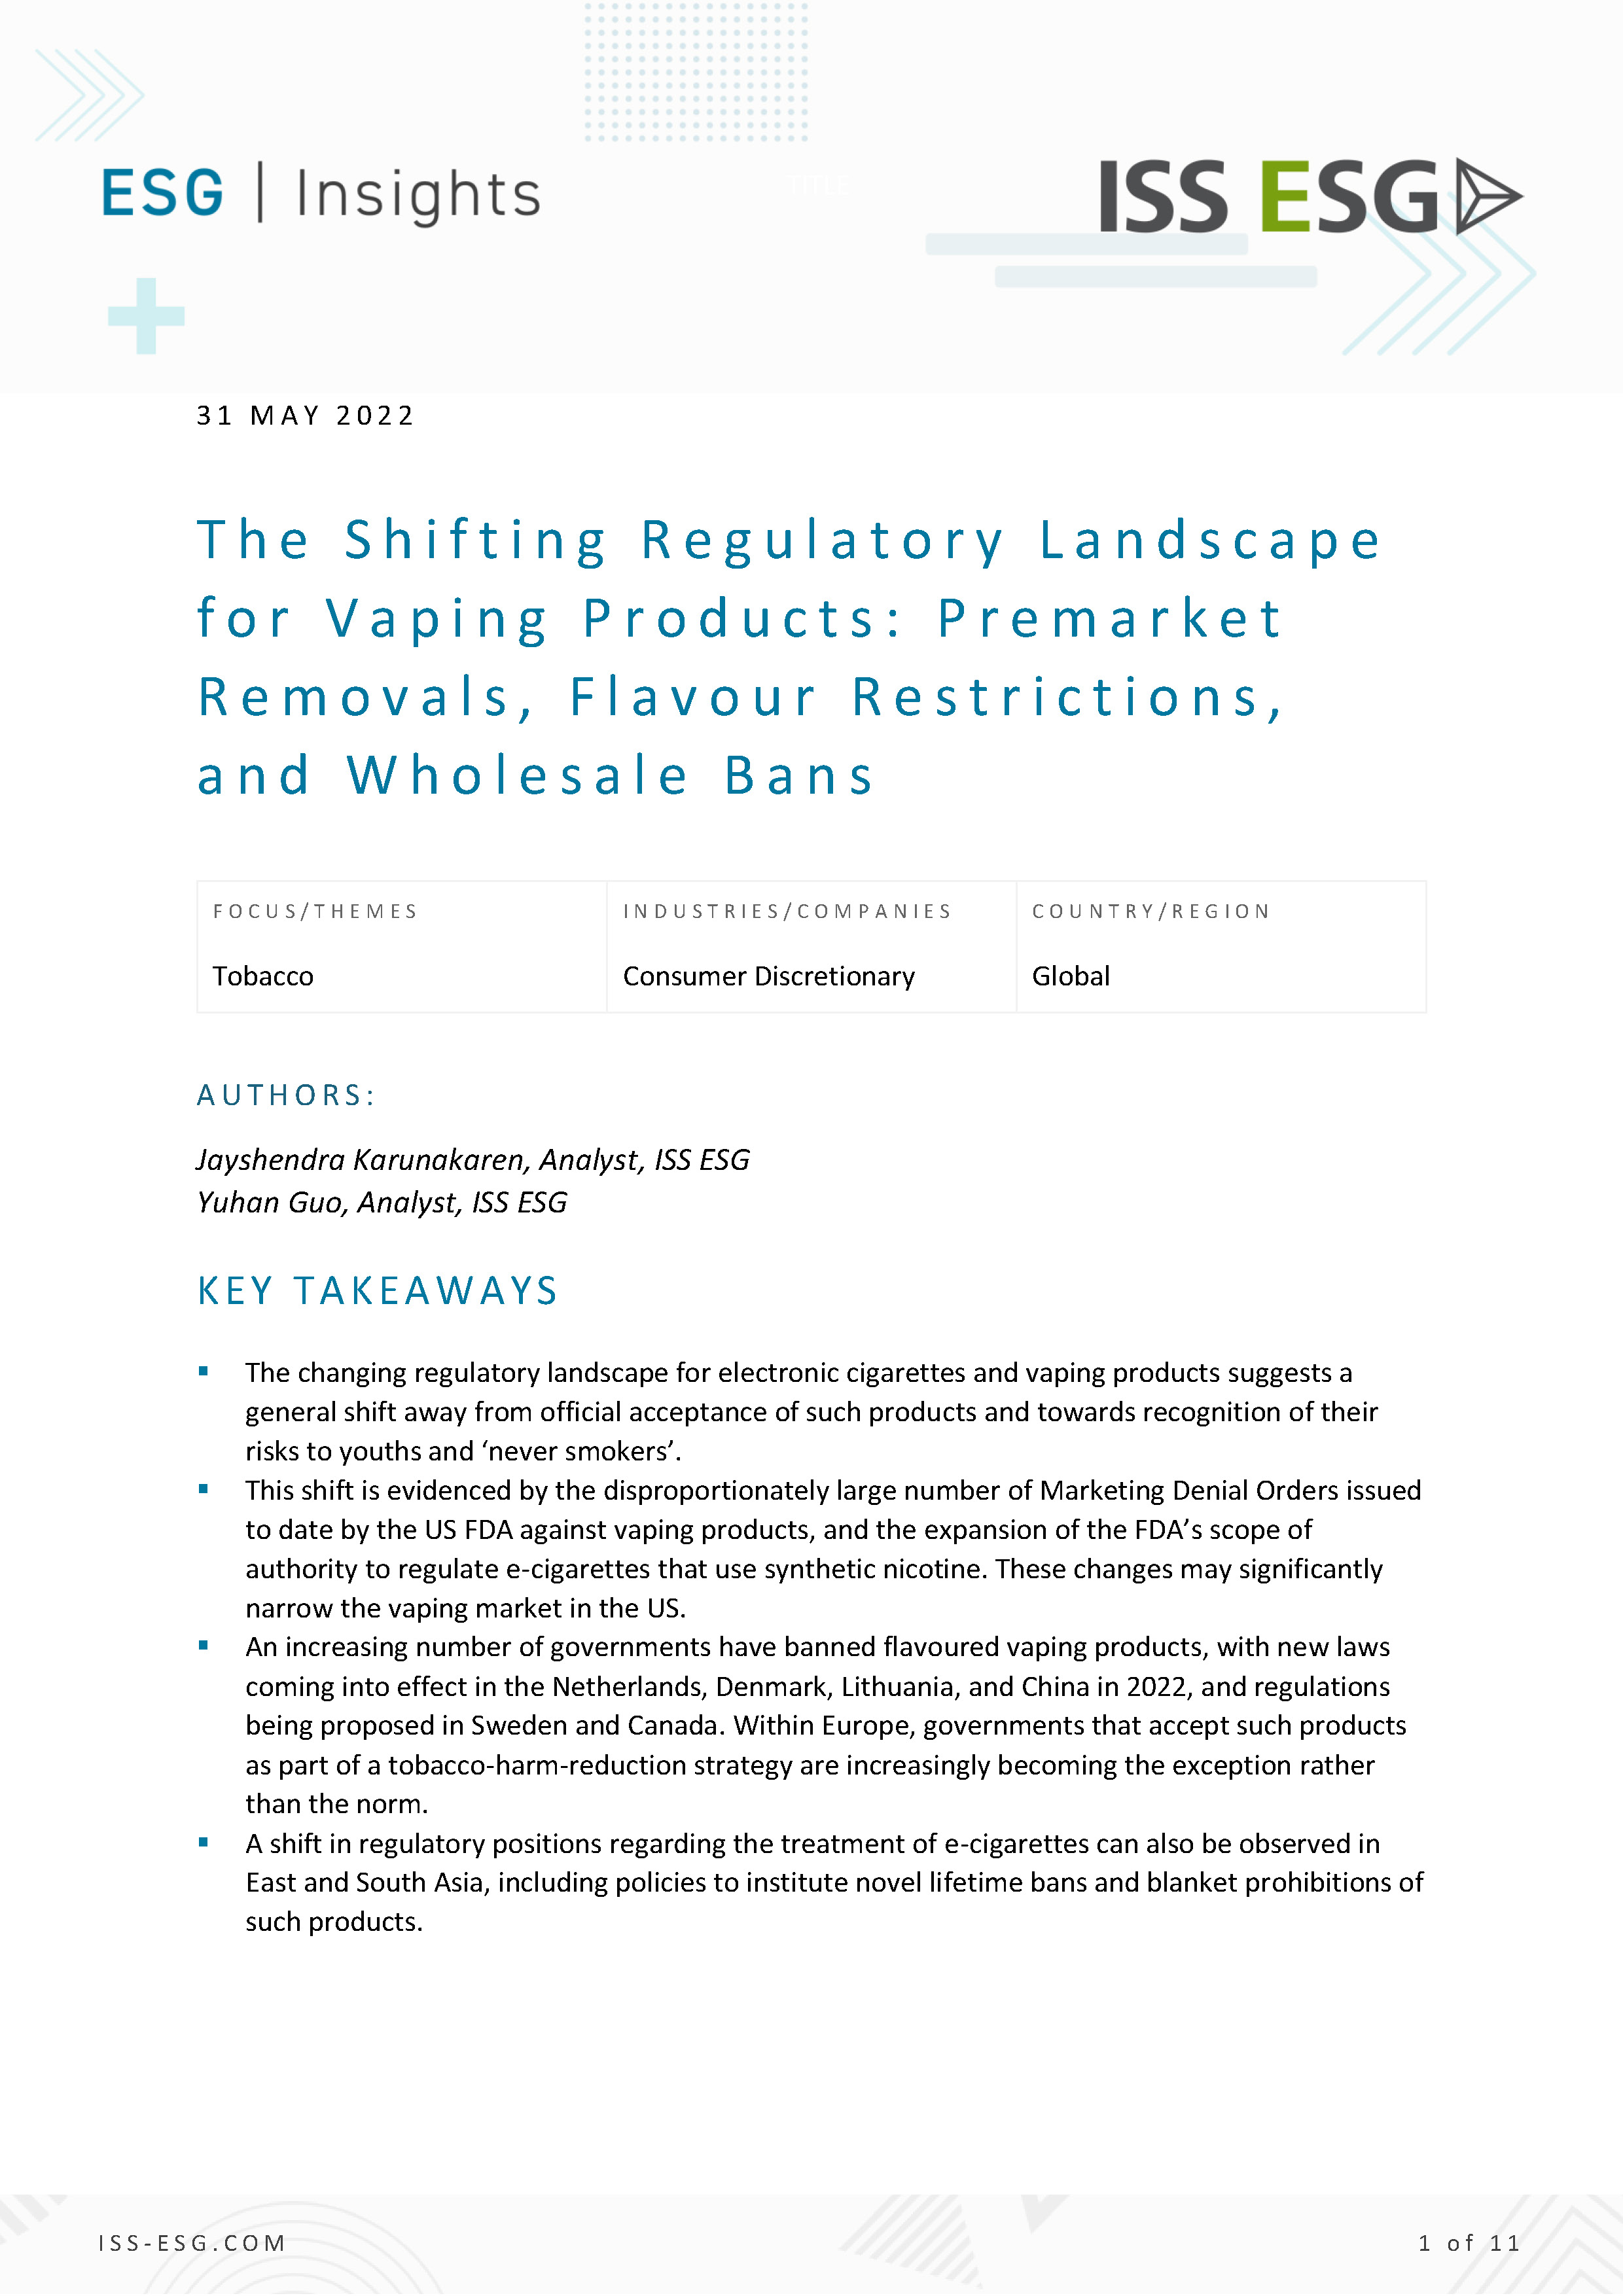 The Shifting Regulatory Landscape for Vaping Products: Premarket Removals, Flavour Restrictions, and Wholesale Bans